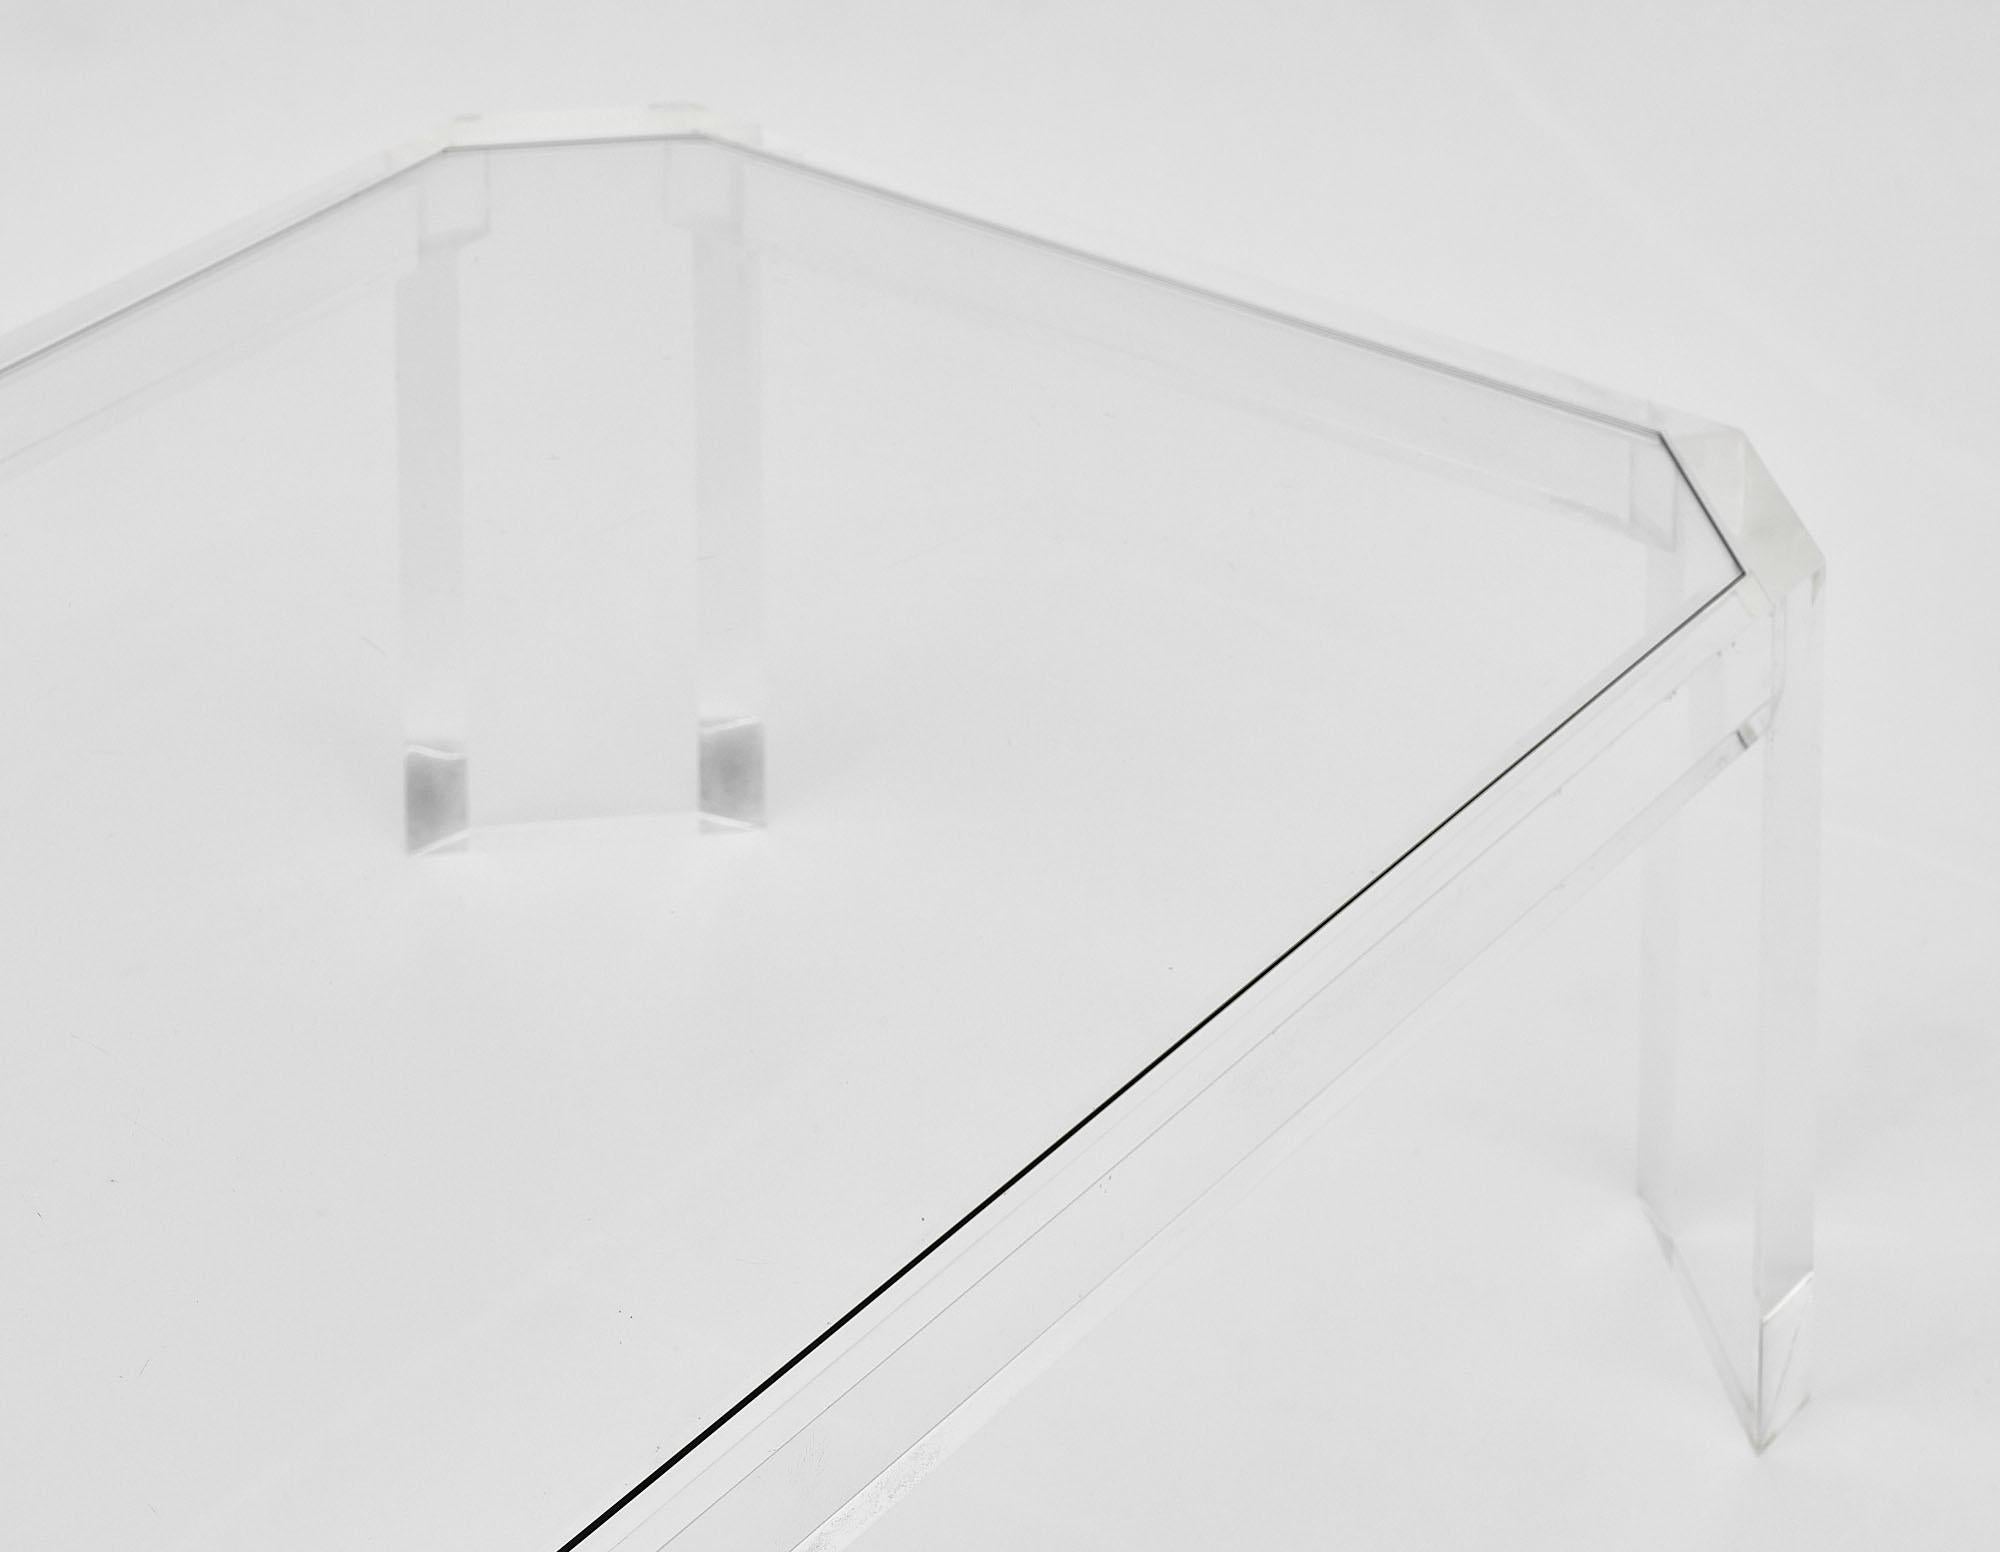 Coffee table from France made of Lucite with a glass top. The Lucite structure has been professionally polished.